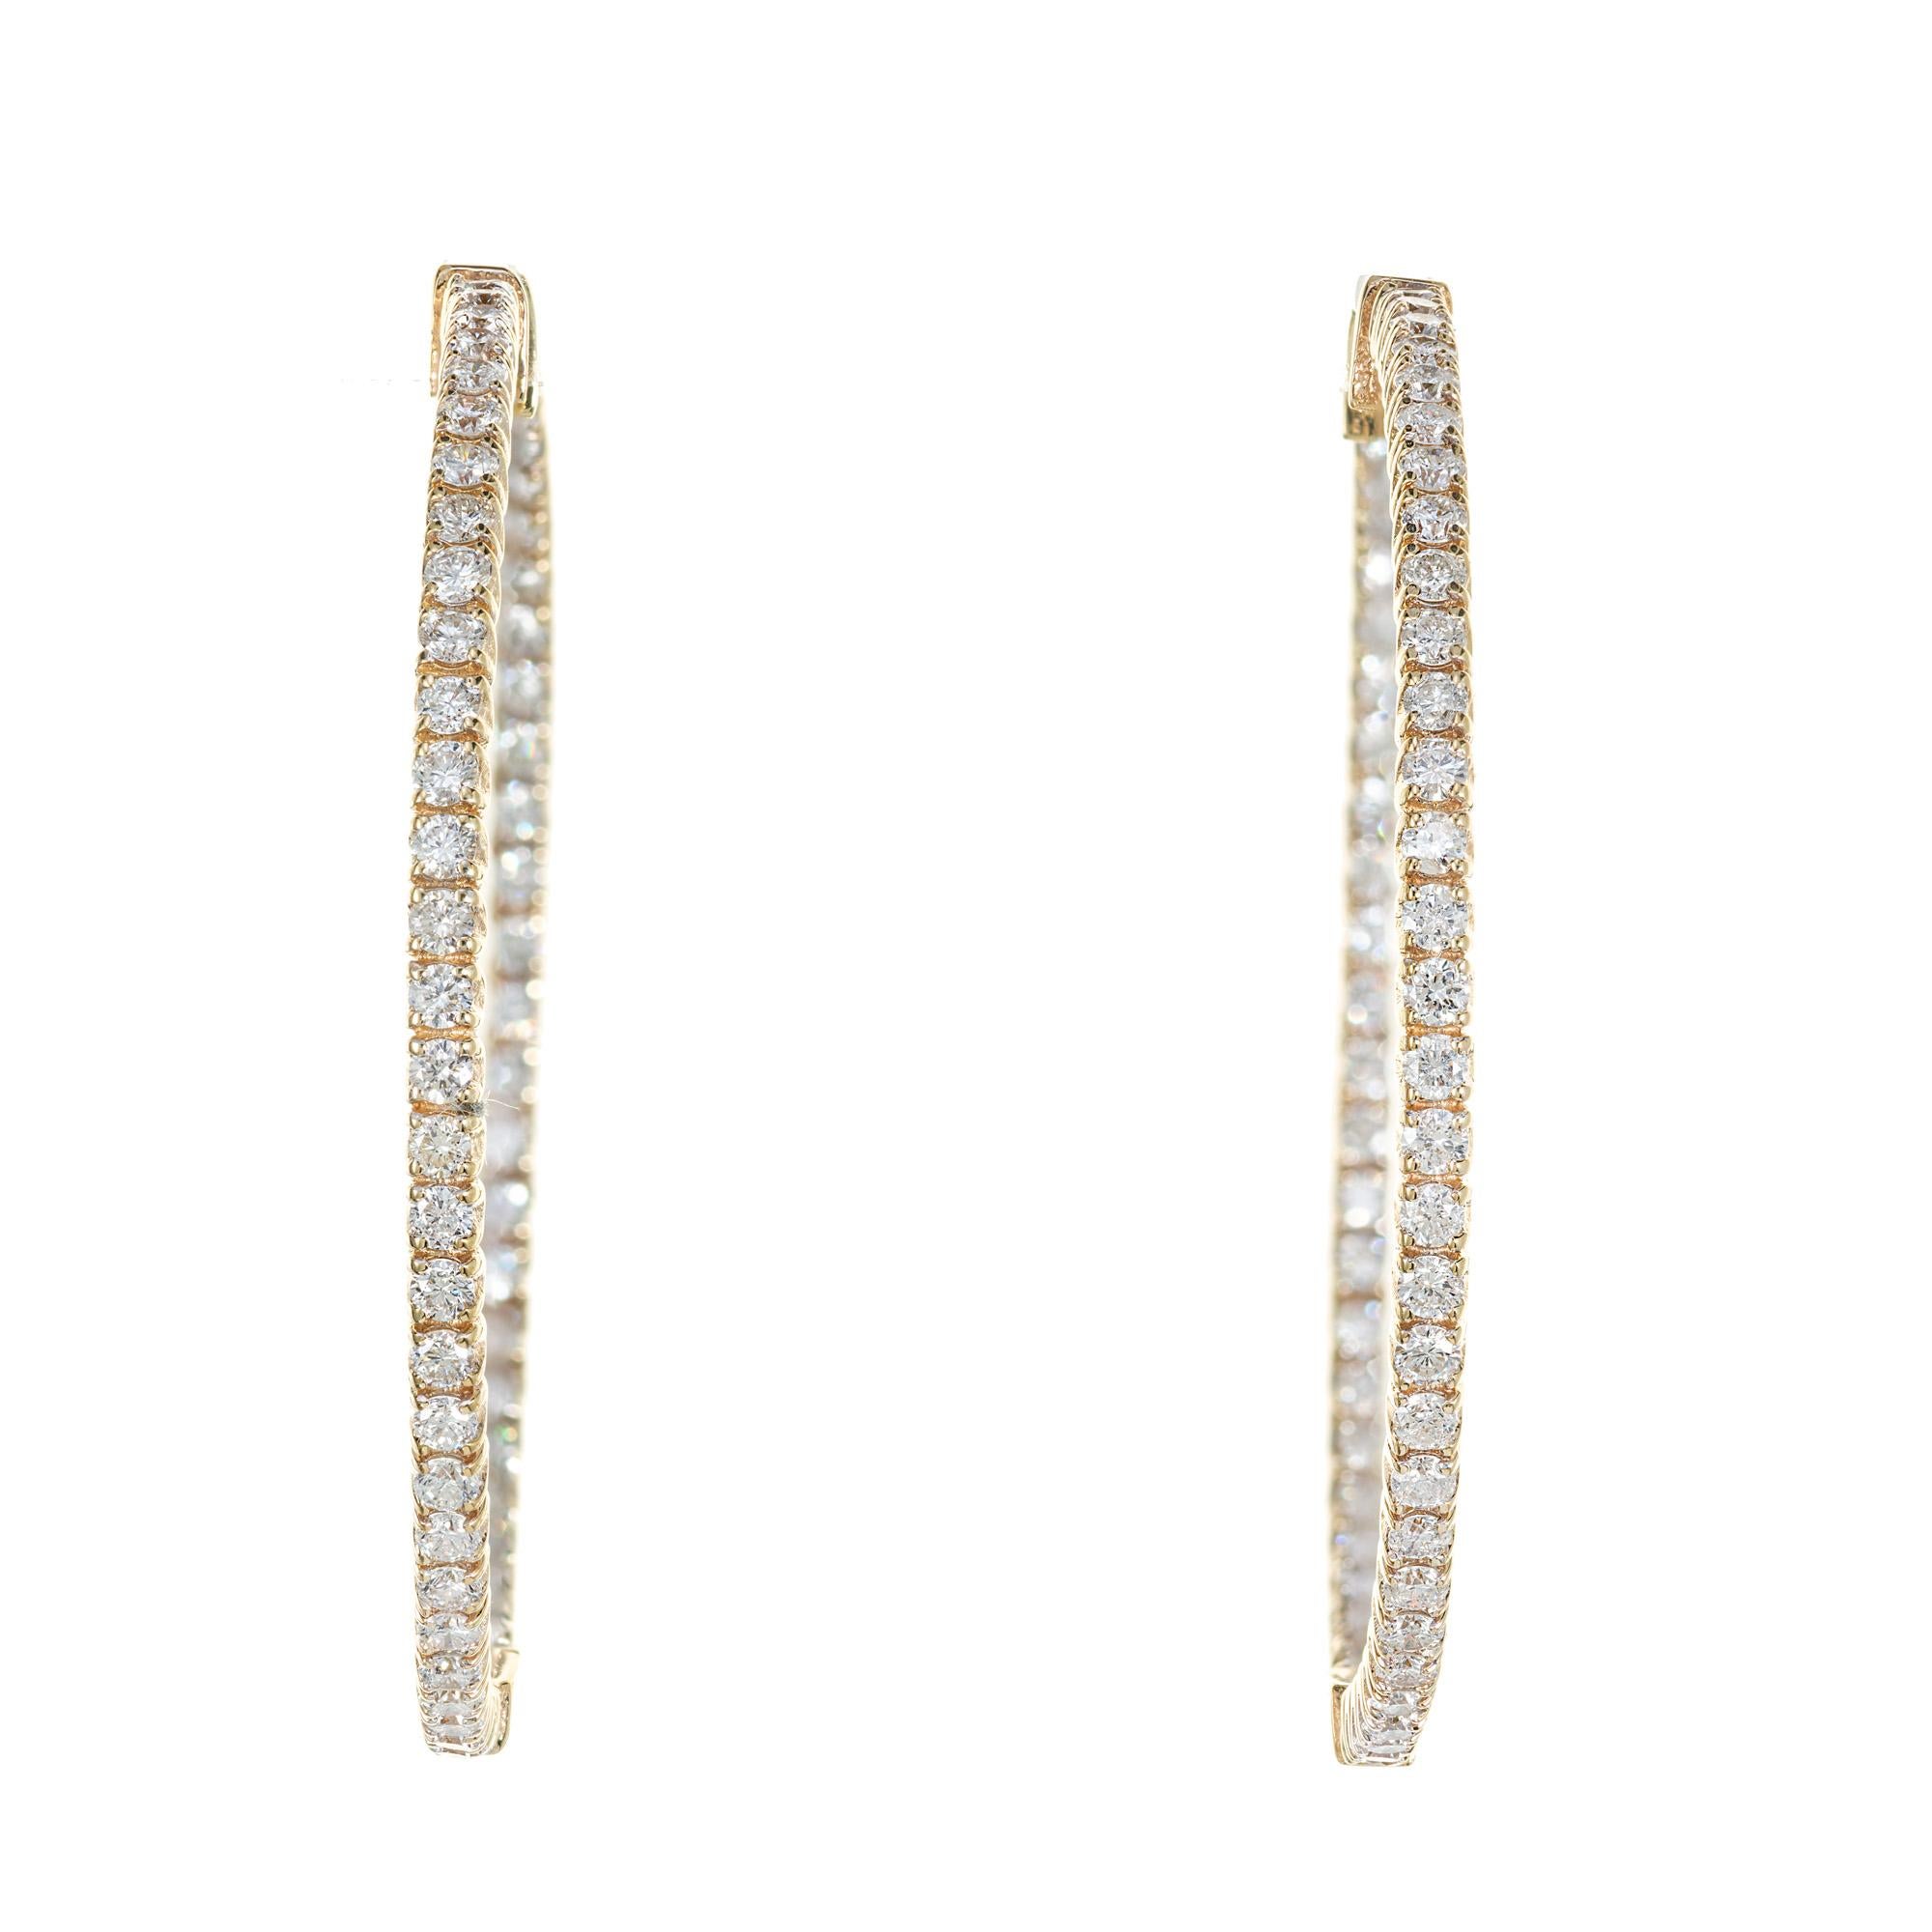 2 Inch wide diamond hoop earrings. 114 round brilliant cut diamonds 2.85cts set in 14k yellow gold hoop settings. 

114 round brilliant cut diamonds, G-H VS SI approx. 2.85cts
14k yellow gold 
9.7 grams
Top to bottom: 41.7mm or 1.64 Inches
Width: